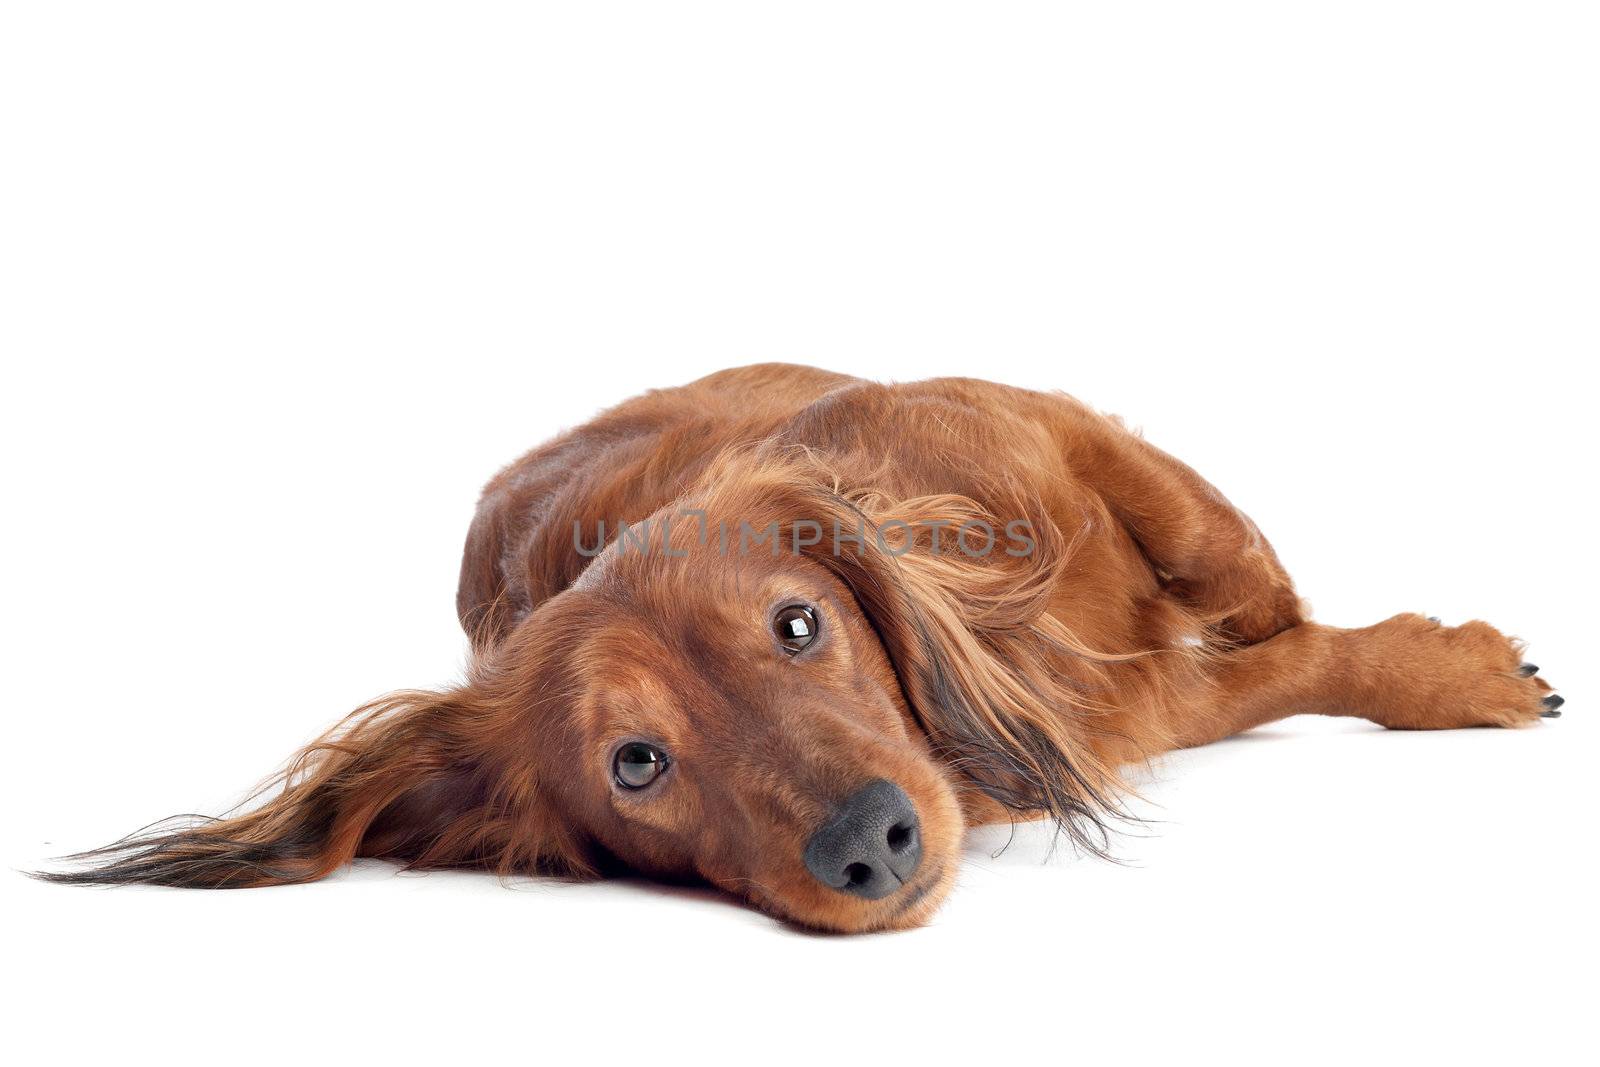 Dachshund lying on ground in front of a white background